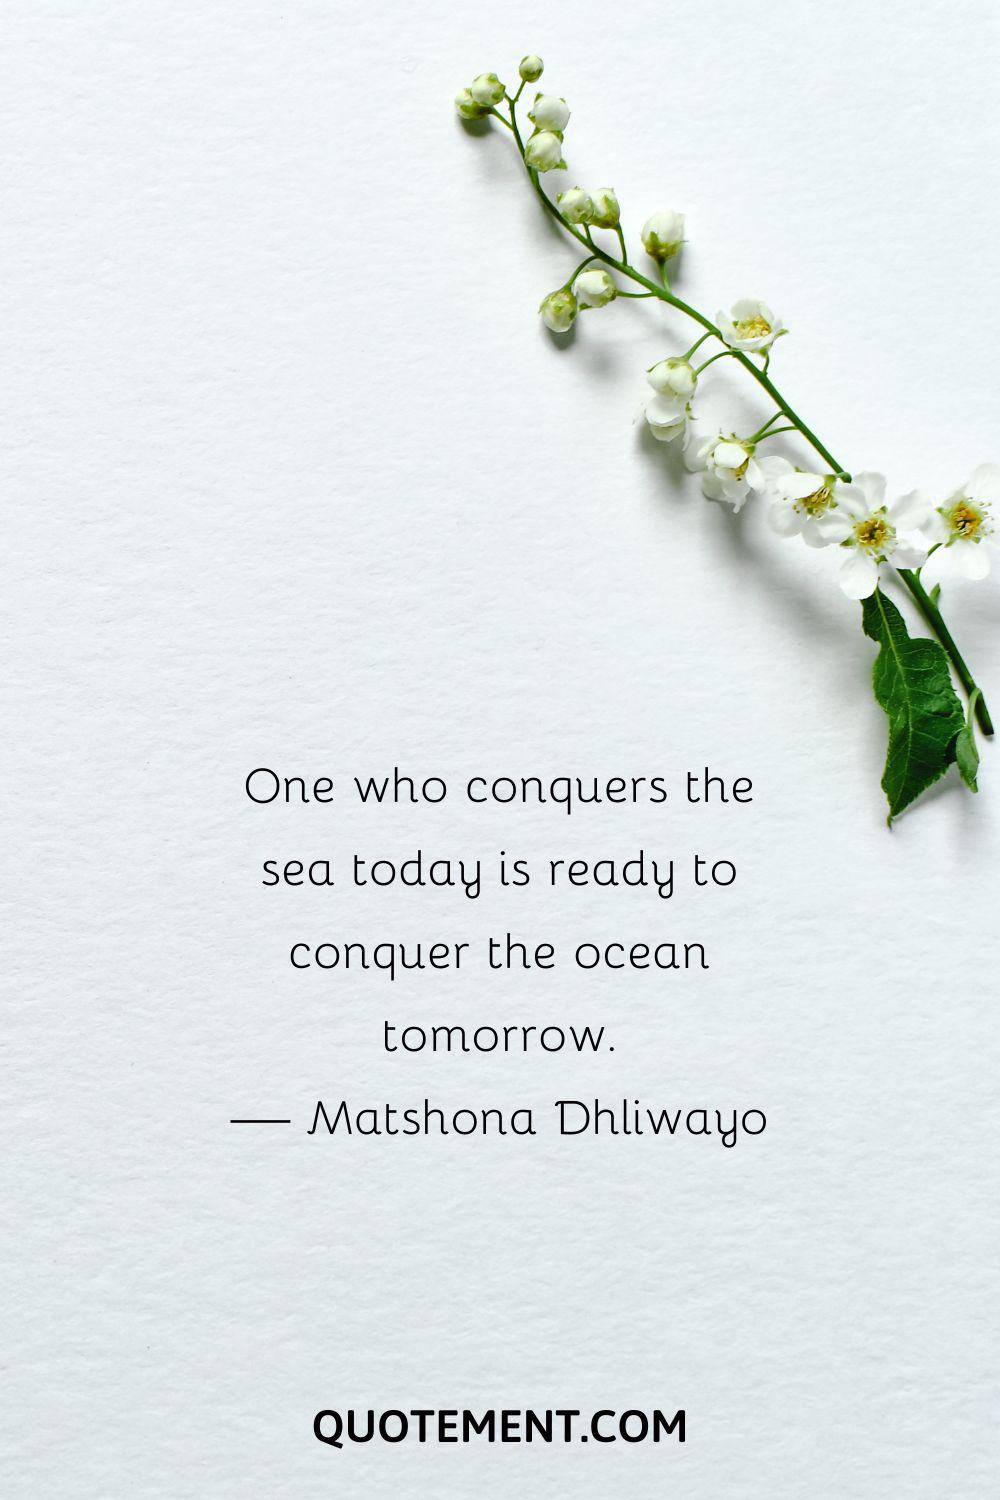 One who conquers the sea today is ready to conquer the ocean tomorrow